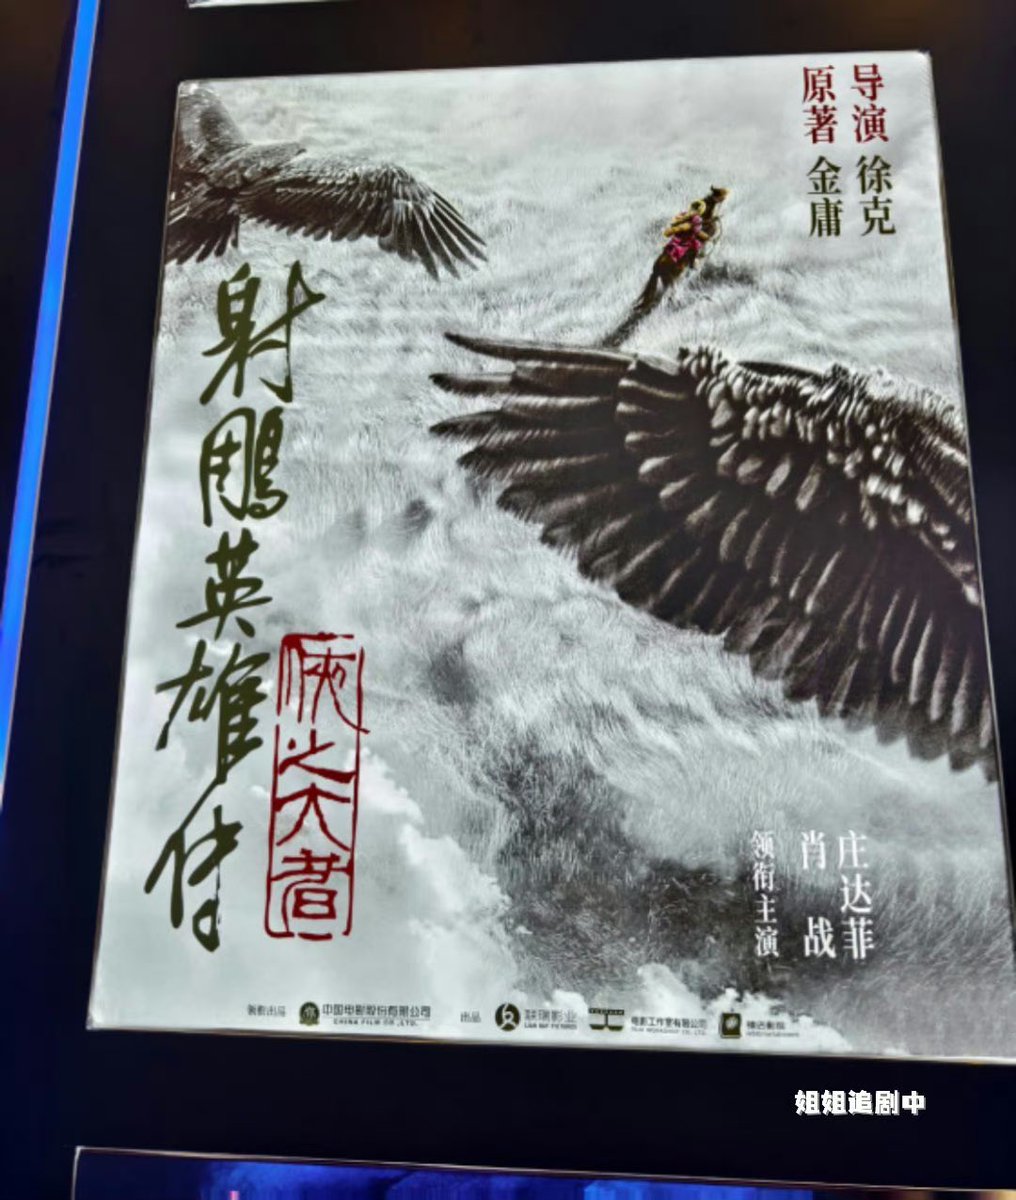 China Film Pavilion at the Cultural Expo(Shenzhen) has 《The Legend Of Condor heroes: The great hero》poster on their display 😍 Cr: 姐姐追剧中 #XiaoZhan #XiaoZhanxGuoJing #TheLegendOfCondorHeroes